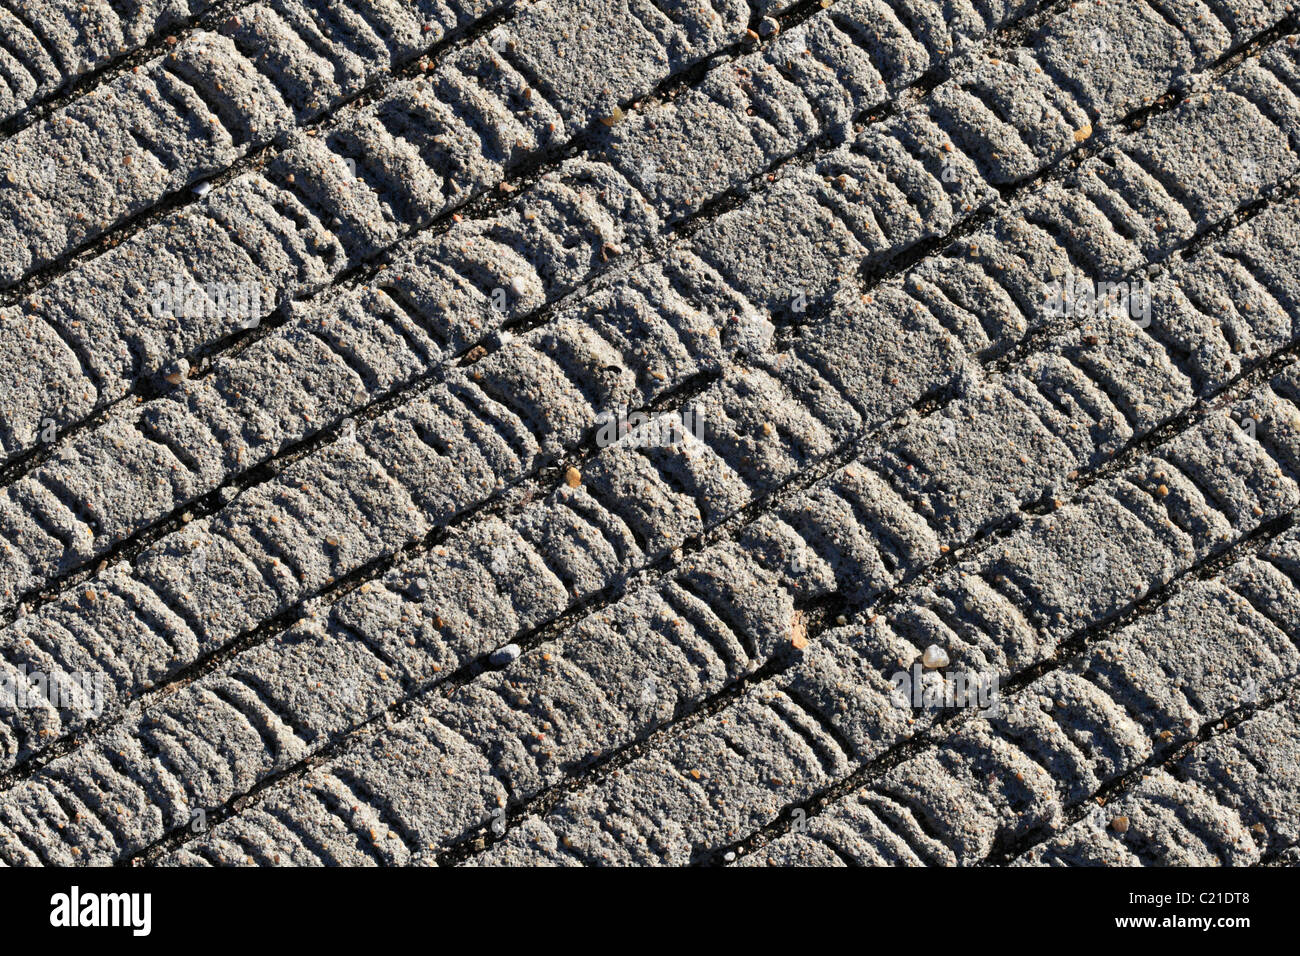 textured concrete background with diagonal grooves to increase traction Stock Photo